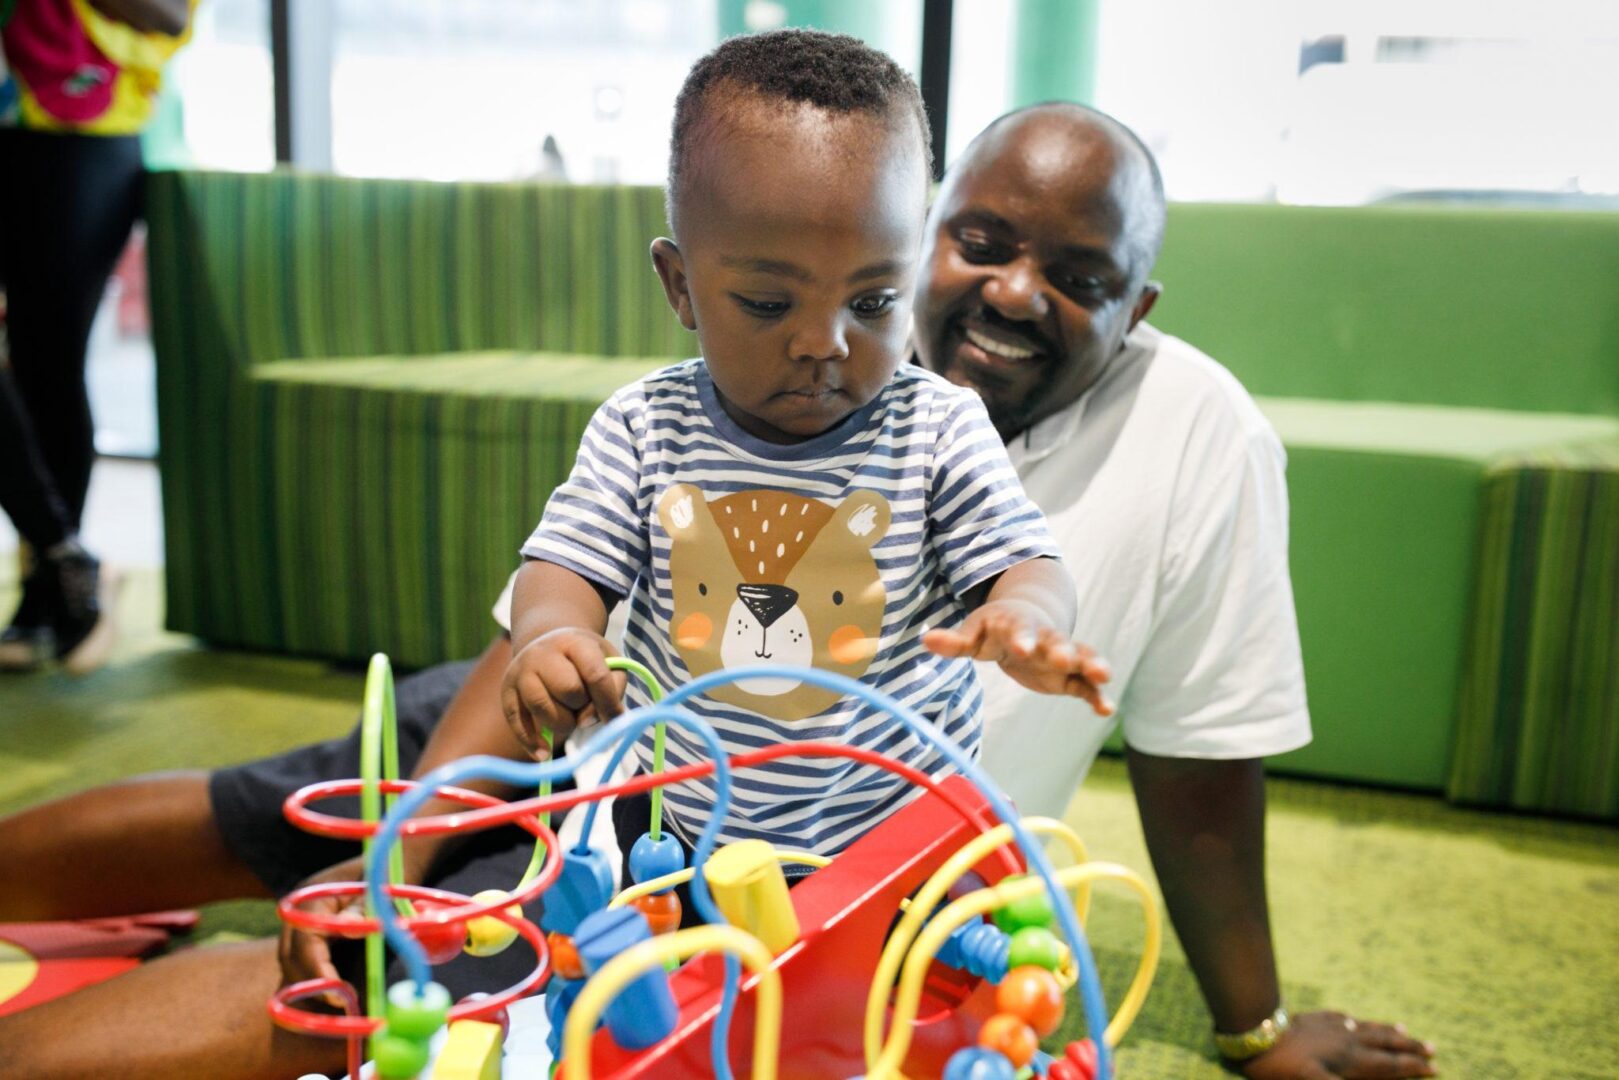 Father and Son playing in the Ronald McDonald Family Room at Perth Children's Hospital